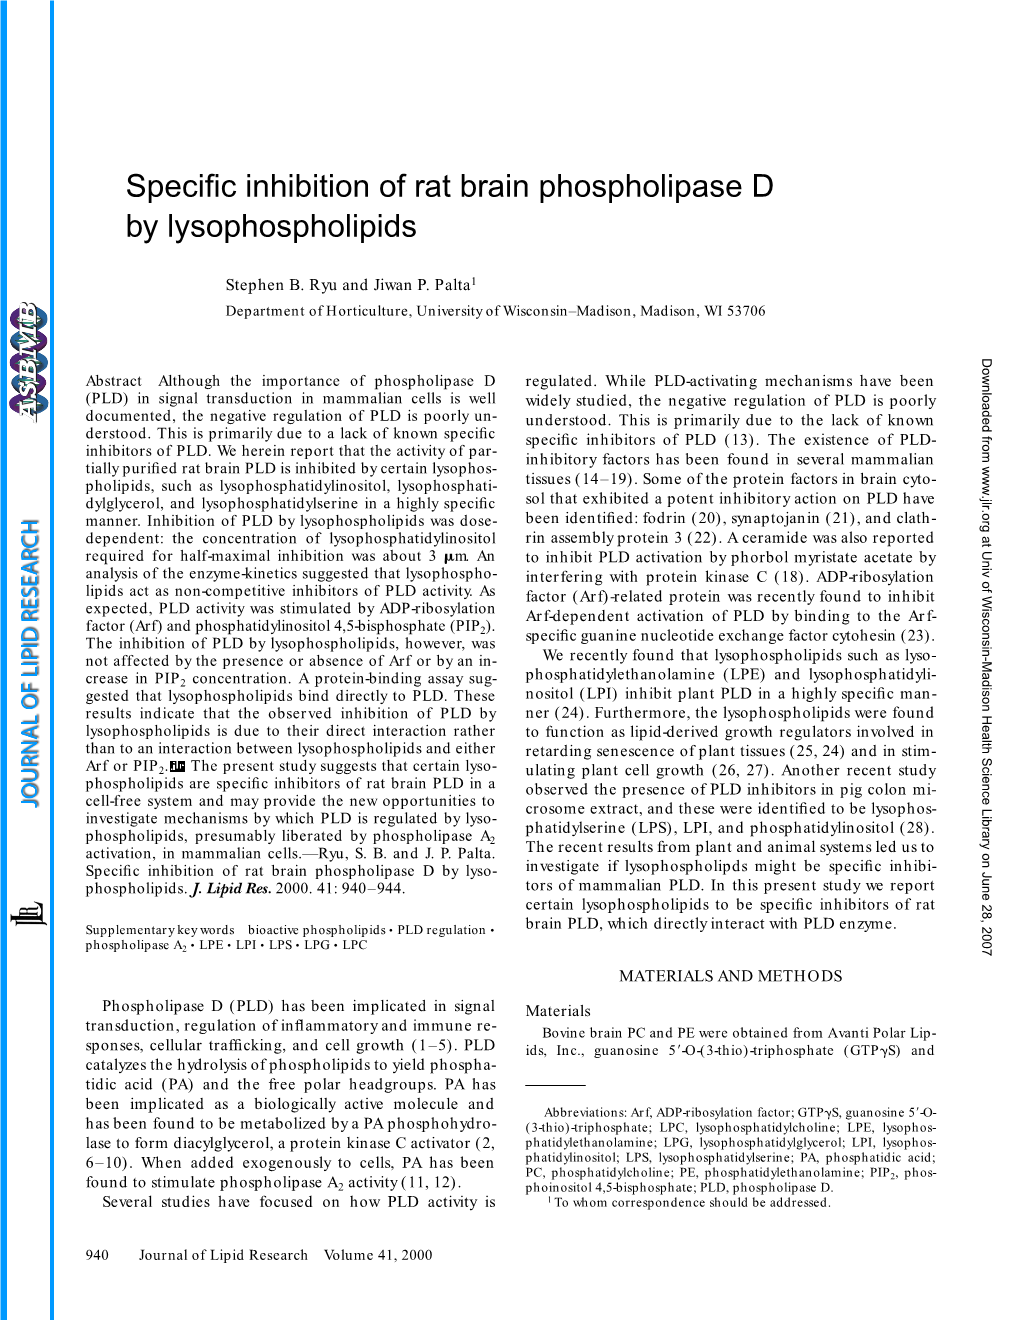 Specific Inhibition of Rat Brain Phospholipase D By